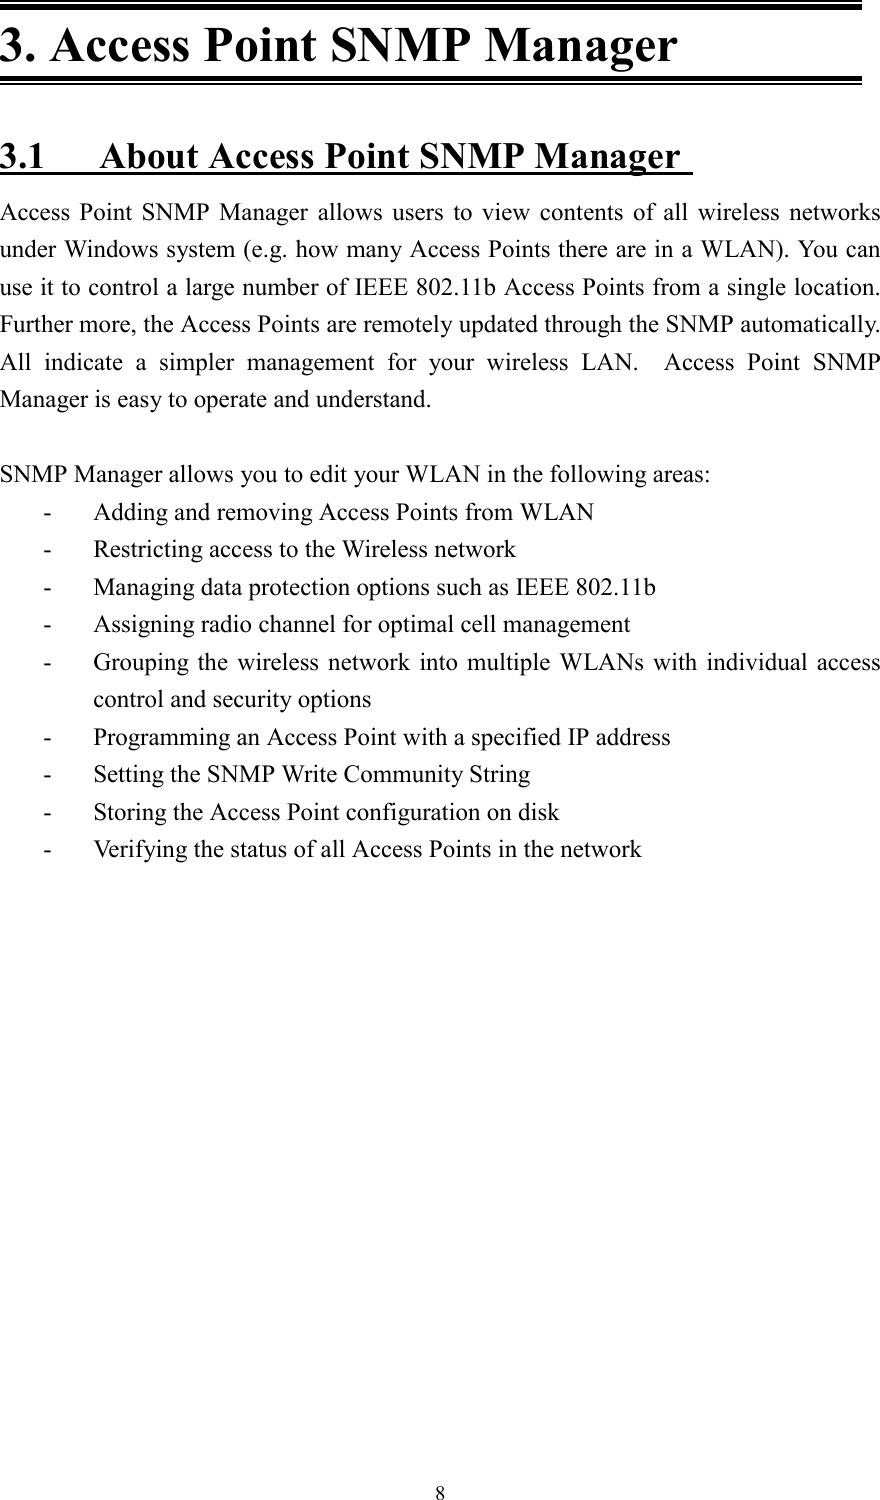 83. Access Point SNMP Manager3.1 About Access Point SNMP ManagerAccess Point SNMP Manager allows users to view contents of all wireless networksunder Windows system (e.g. how many Access Points there are in a WLAN). You canuse it to control a large number of IEEE 802.11b Access Points from a single location.Further more, the Access Points are remotely updated through the SNMP automatically.All indicate a simpler management for your wireless LAN.  Access Point SNMPManager is easy to operate and understand.SNMP Manager allows you to edit your WLAN in the following areas:- Adding and removing Access Points from WLAN- Restricting access to the Wireless network- Managing data protection options such as IEEE 802.11b- Assigning radio channel for optimal cell management- Grouping the wireless network into multiple WLANs with individual accesscontrol and security options- Programming an Access Point with a specified IP address- Setting the SNMP Write Community String- Storing the Access Point configuration on disk- Verifying the status of all Access Points in the network